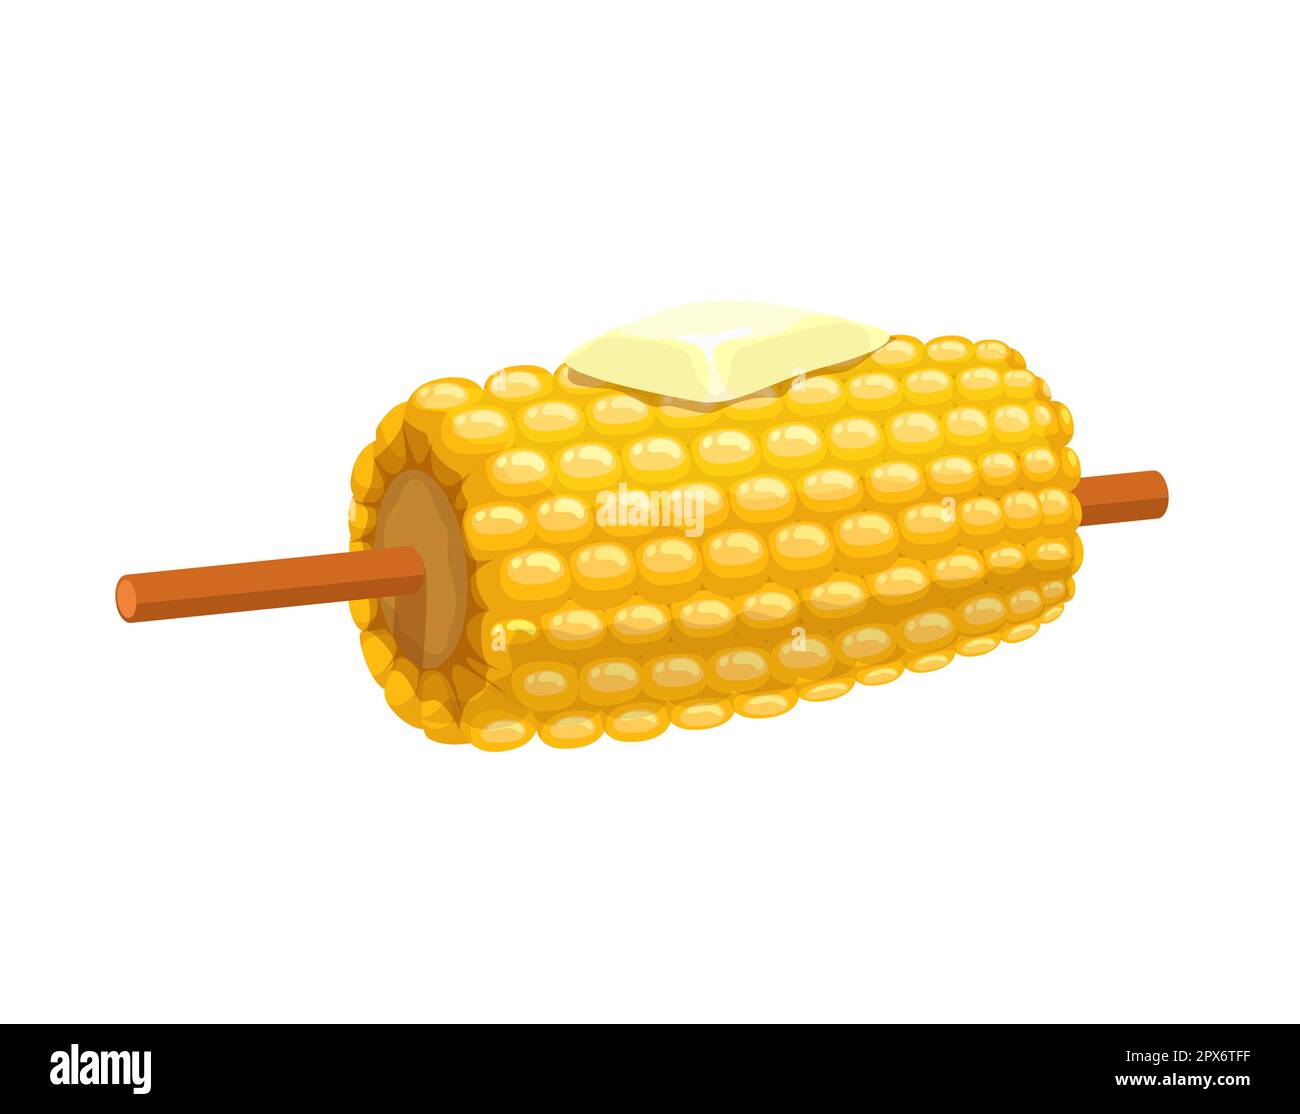 Cartoon sweet corn stick with butter and salt, vector vegetable food. Maize with ripe sweet grains or kernels, hot baked or grilled corn cob on skewer Stock Vector